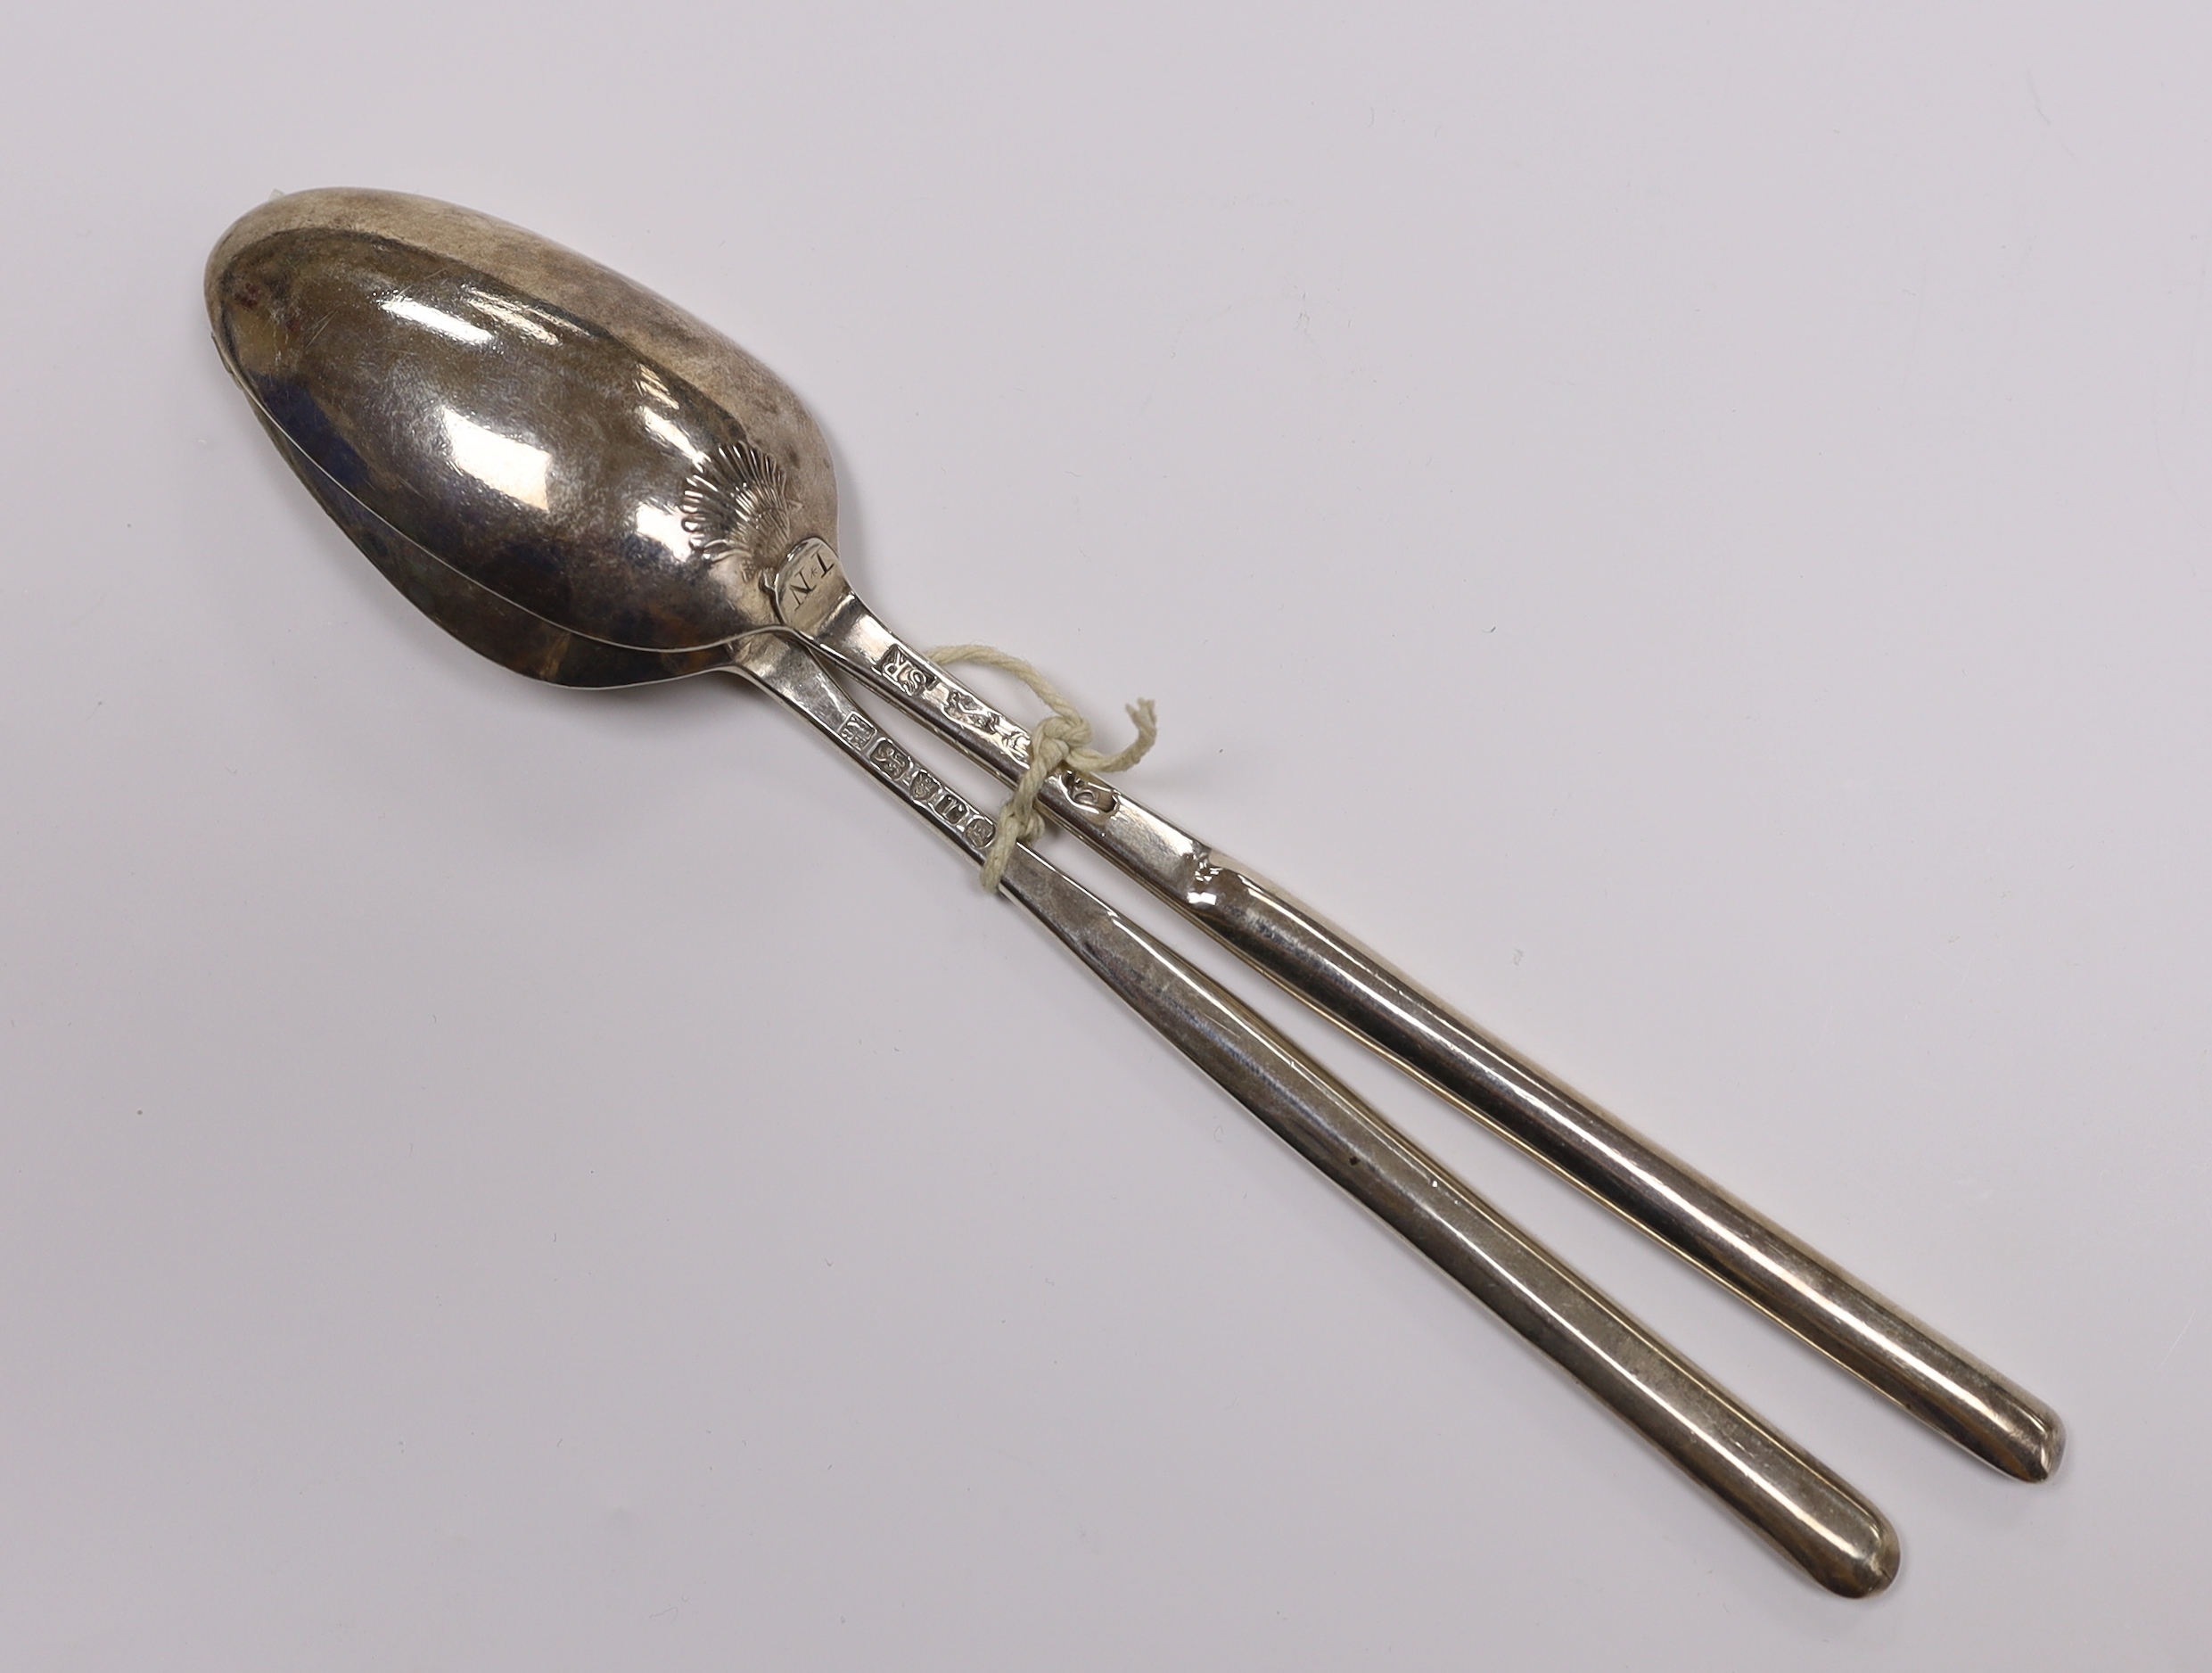 Two 18th century silver combination marrow scoop spoons, shell back by Samuel Roby, London, 1745 and Peter & Ann Bateman, London, 1792, longest 23.1cm, 113 grams.